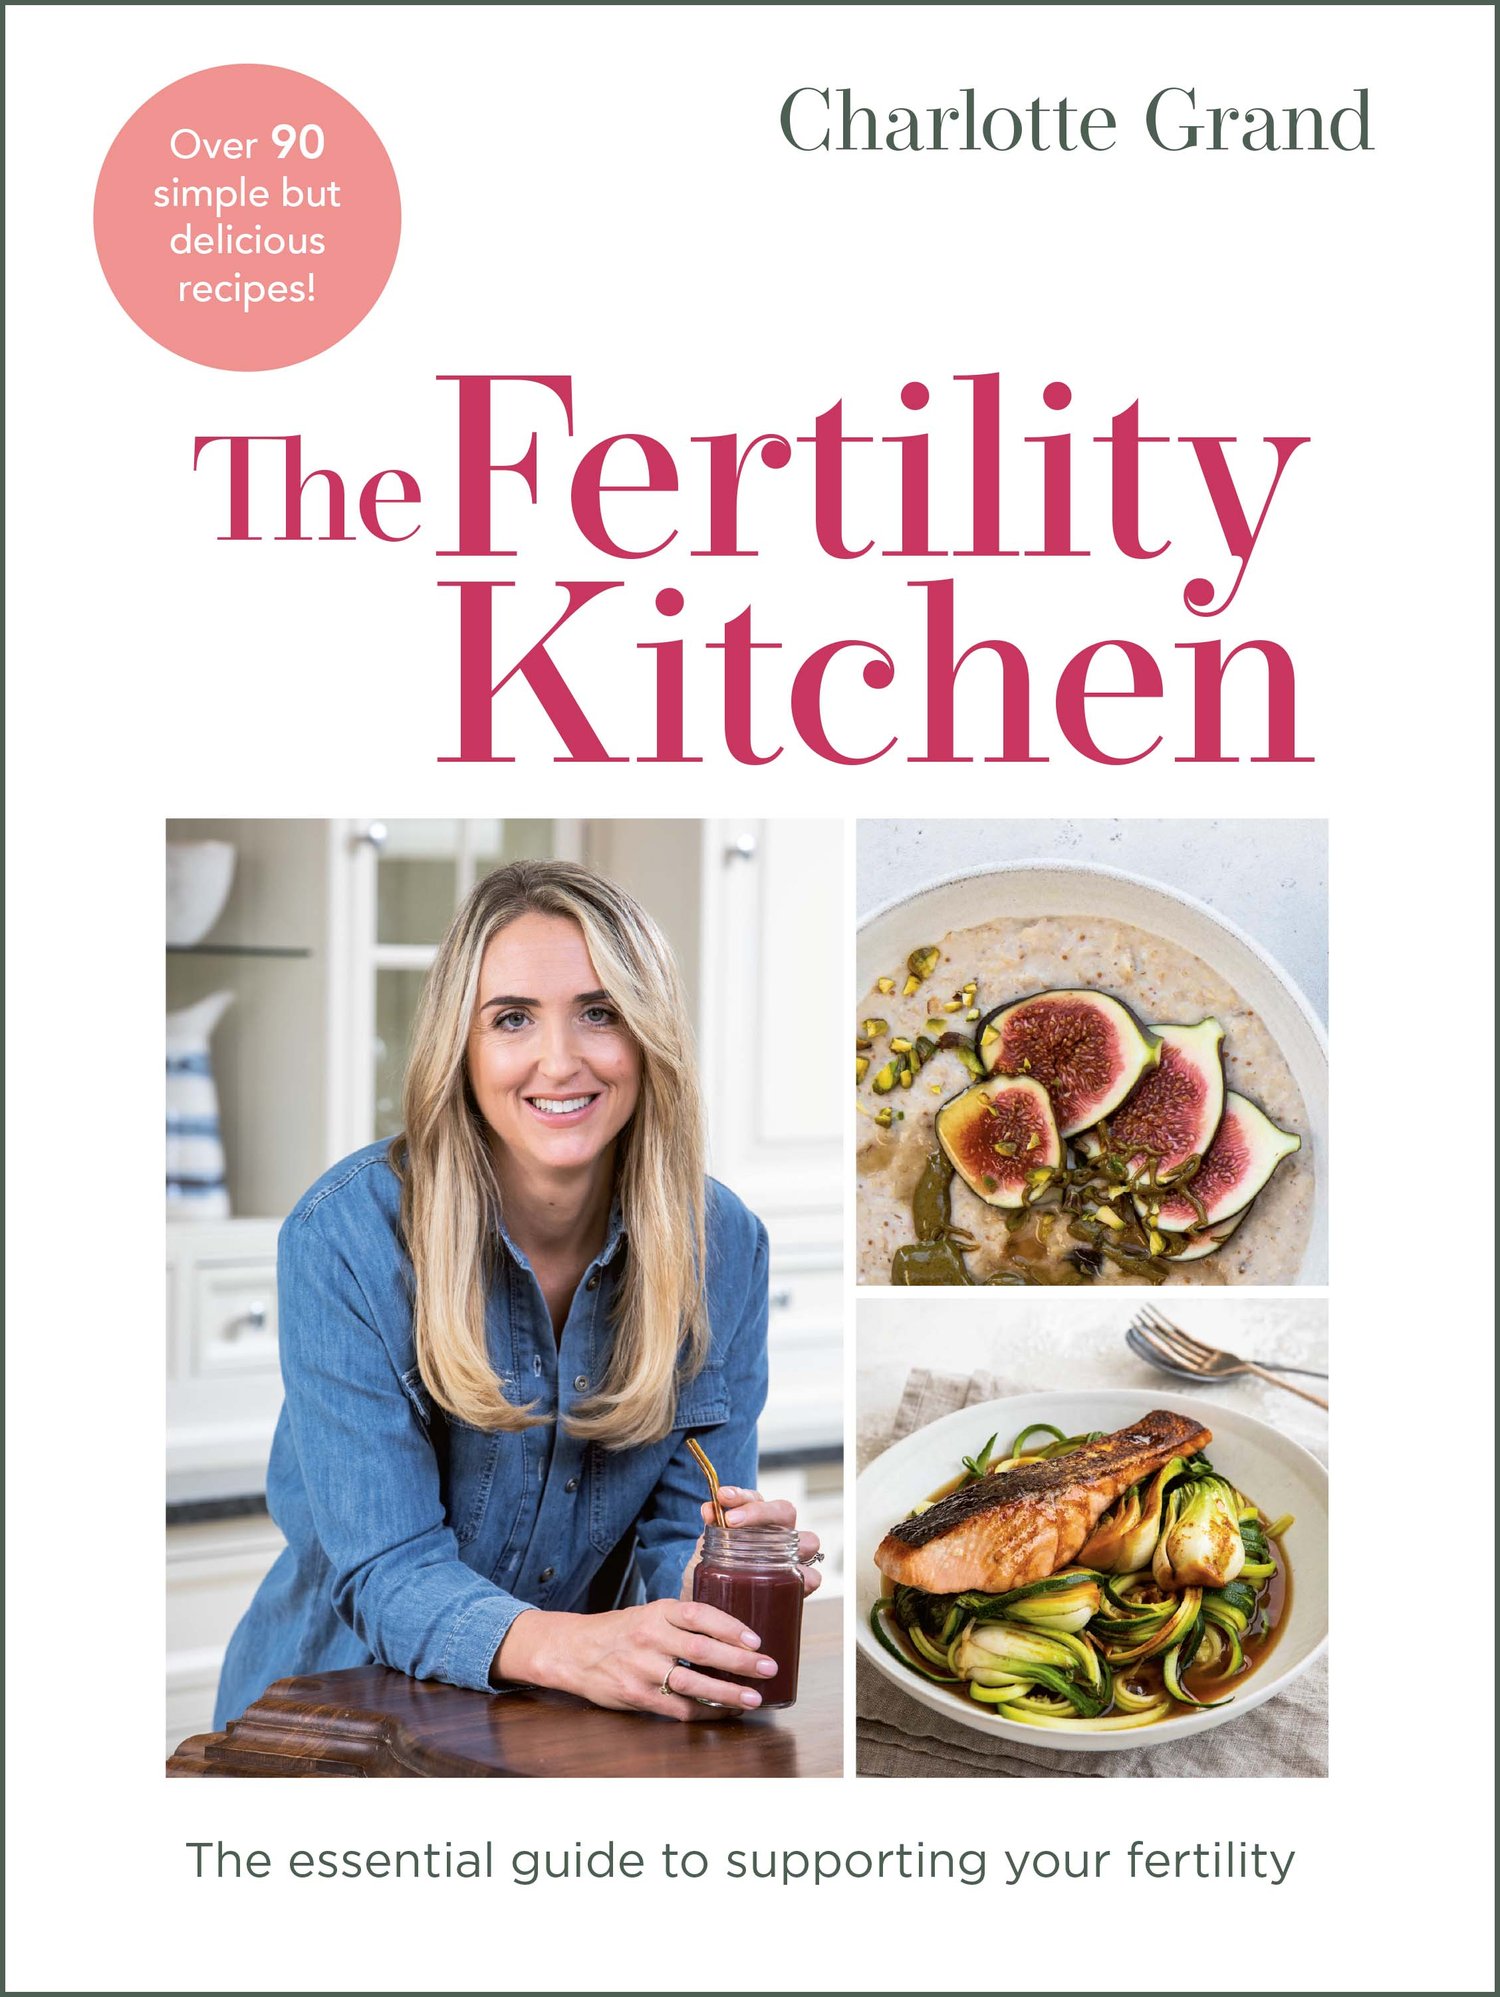 Fertility fermented foods and gut health